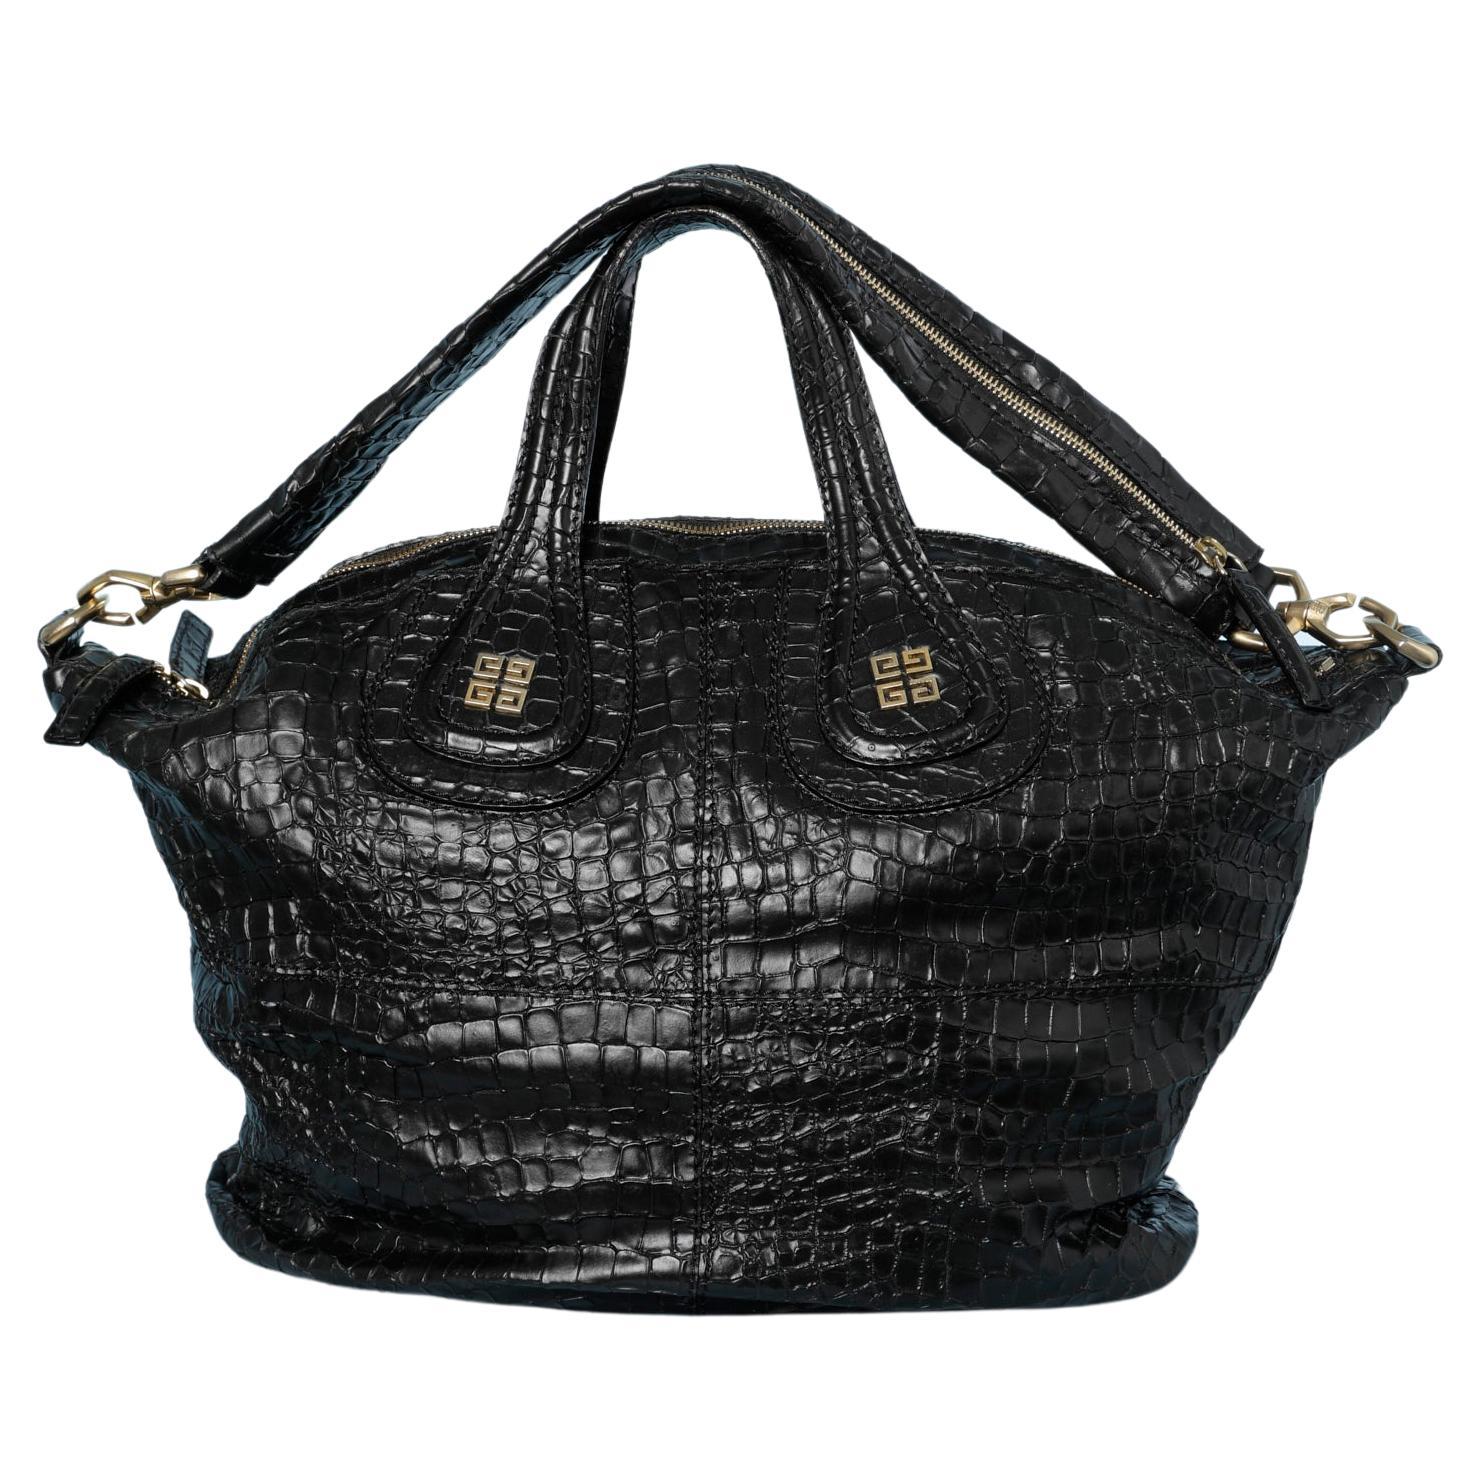 Black leather bag with double handle Givenchy 